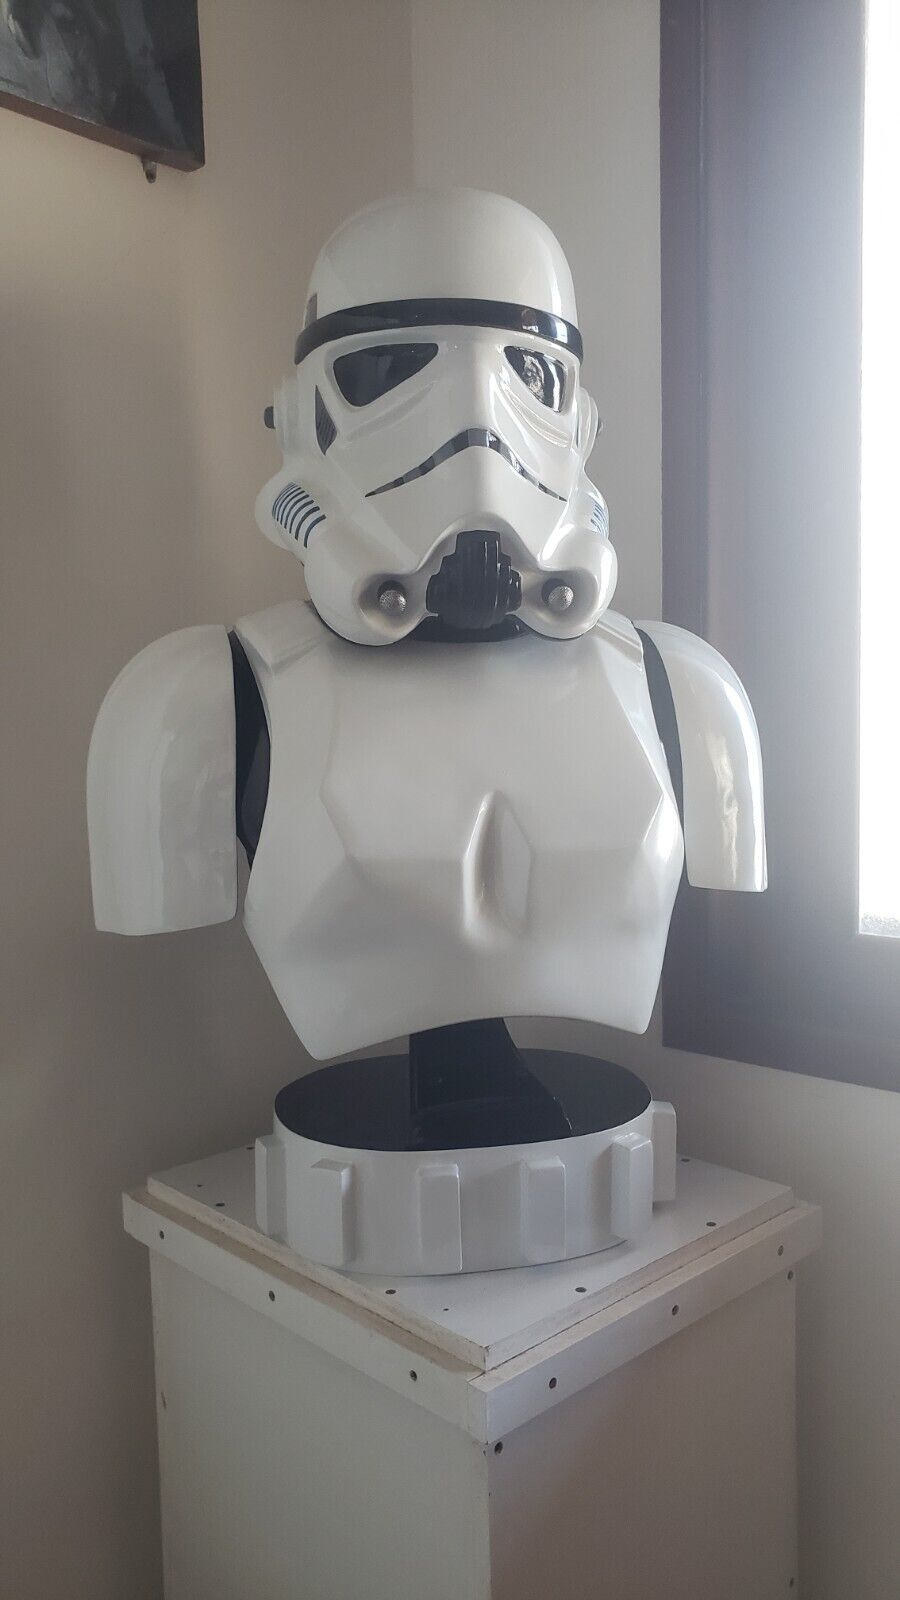 Stormtrooper life size bust 1:1